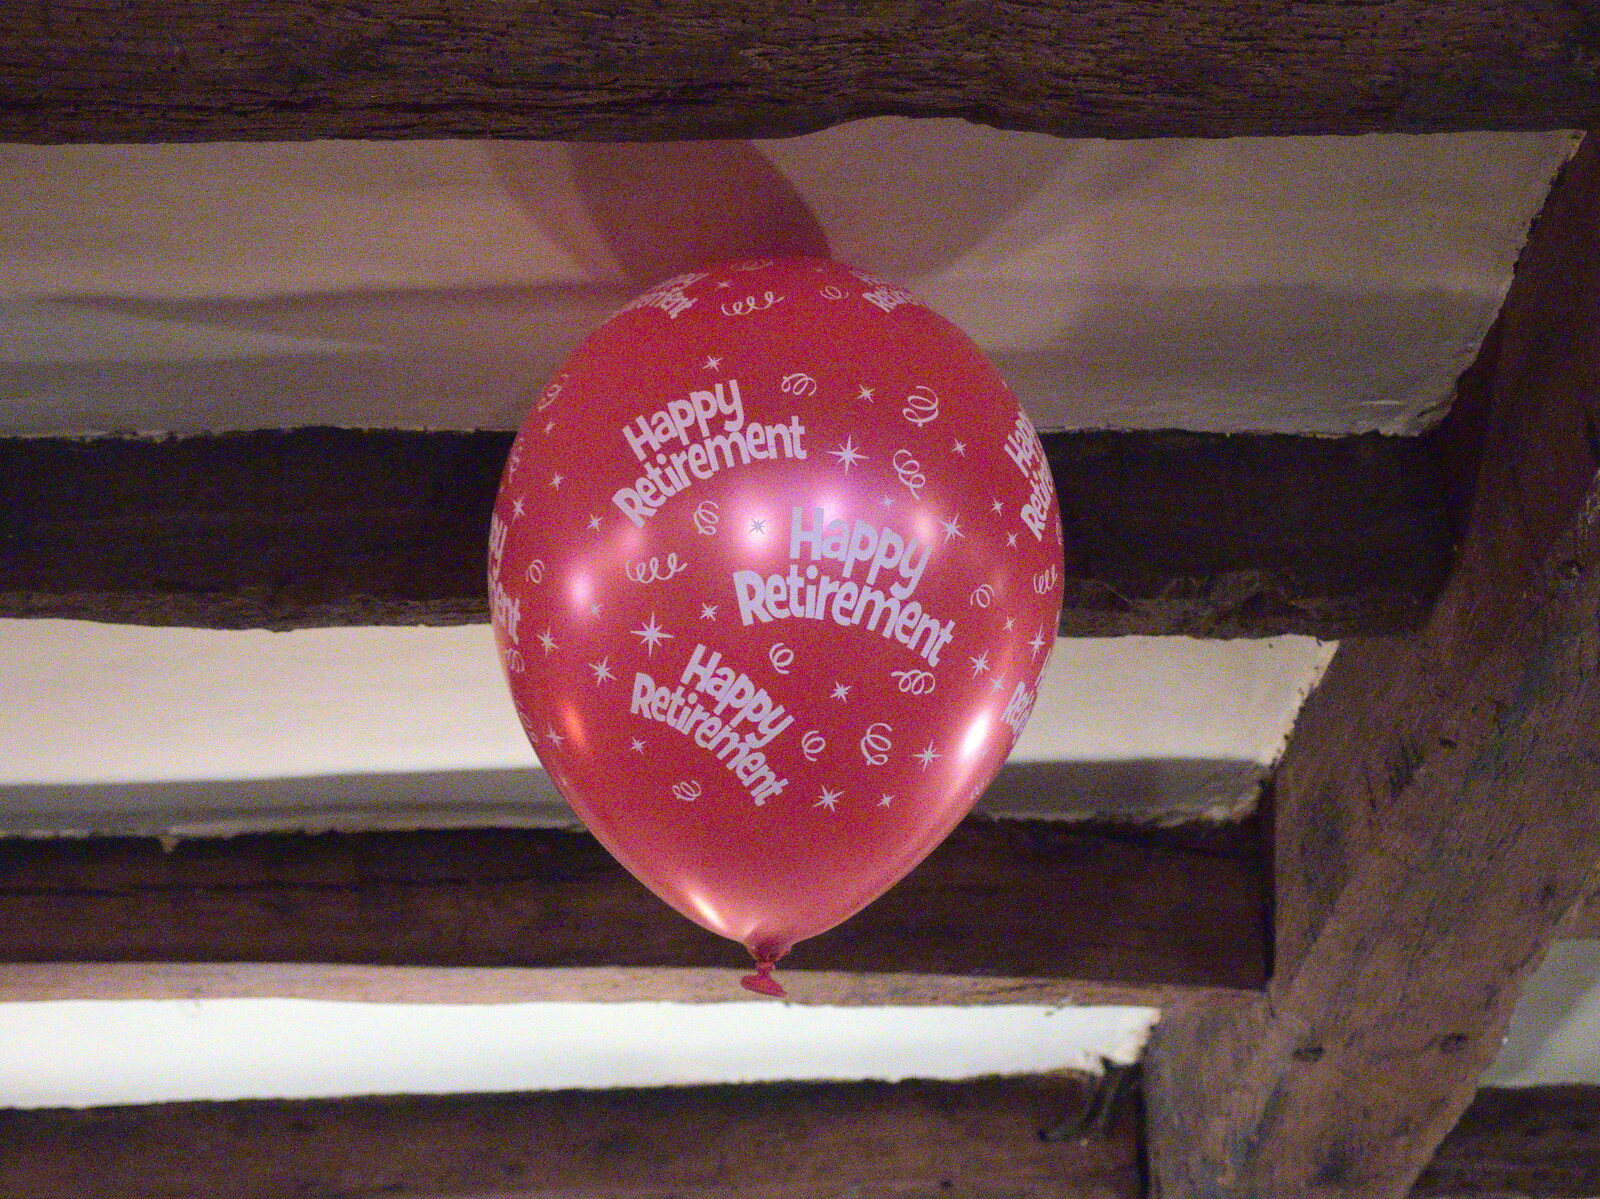 A retirement balloon floats up to the ceiling from John Willy's 65th and Other Stories, The Swan, Brome, Suffolk - 31st October 2015